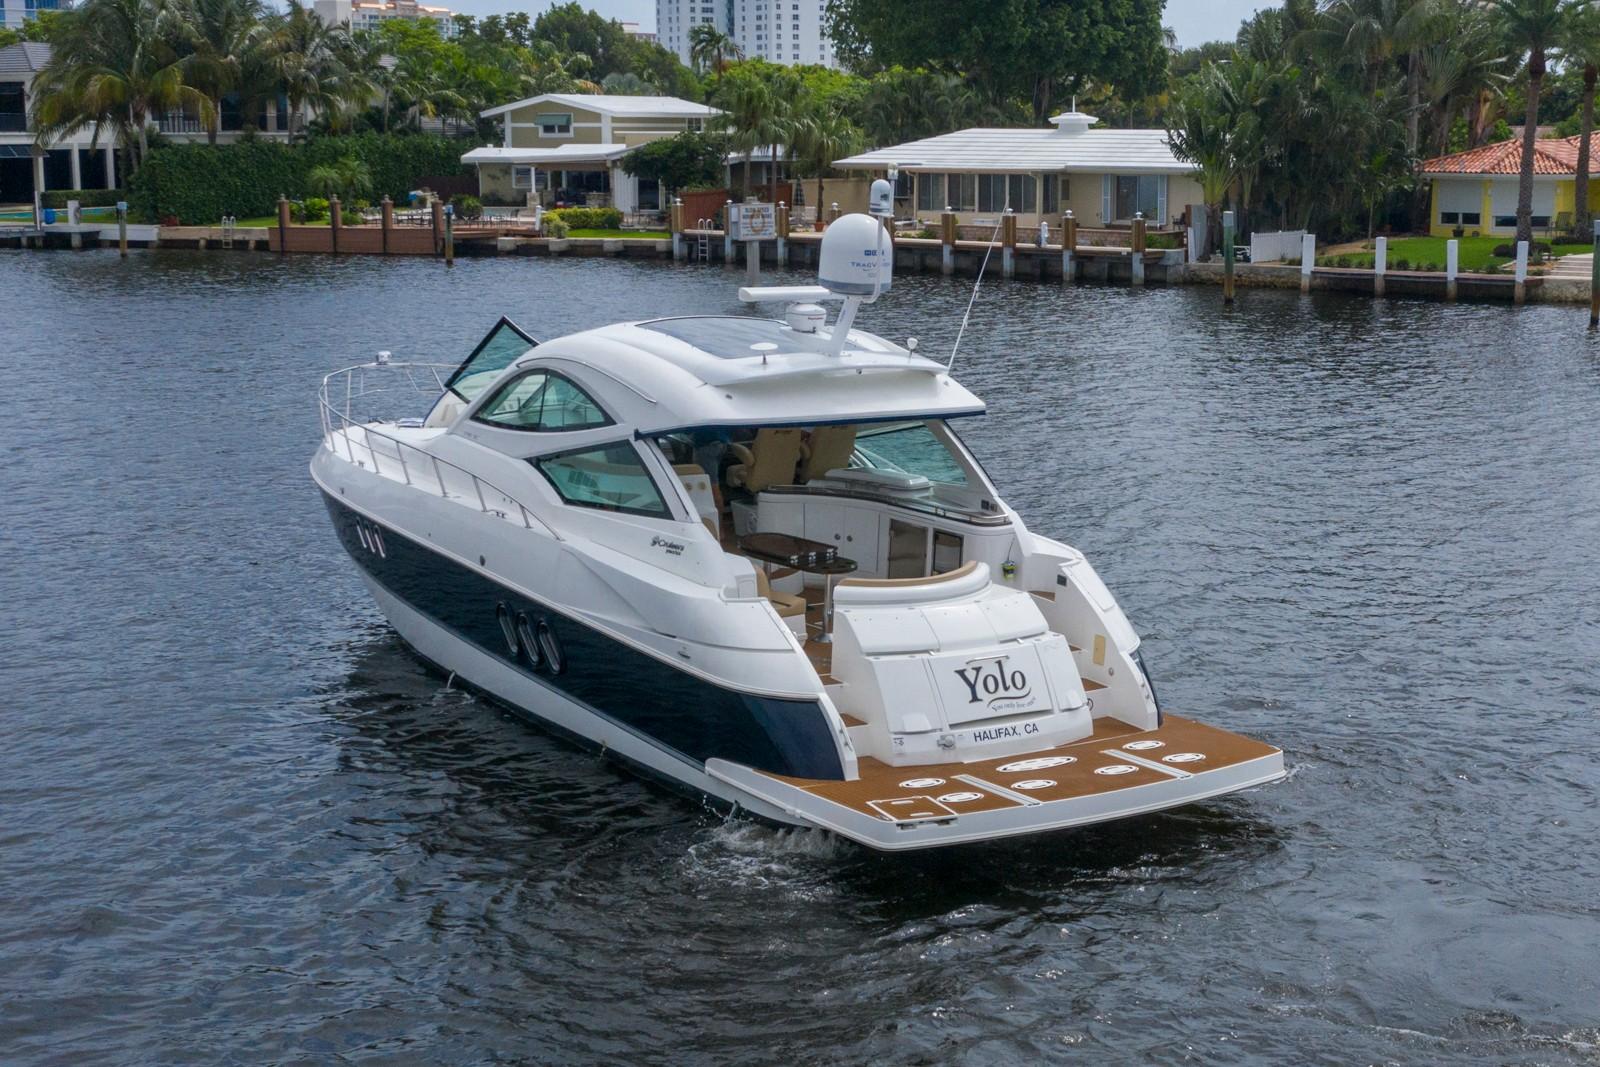 54 ft yacht for sale